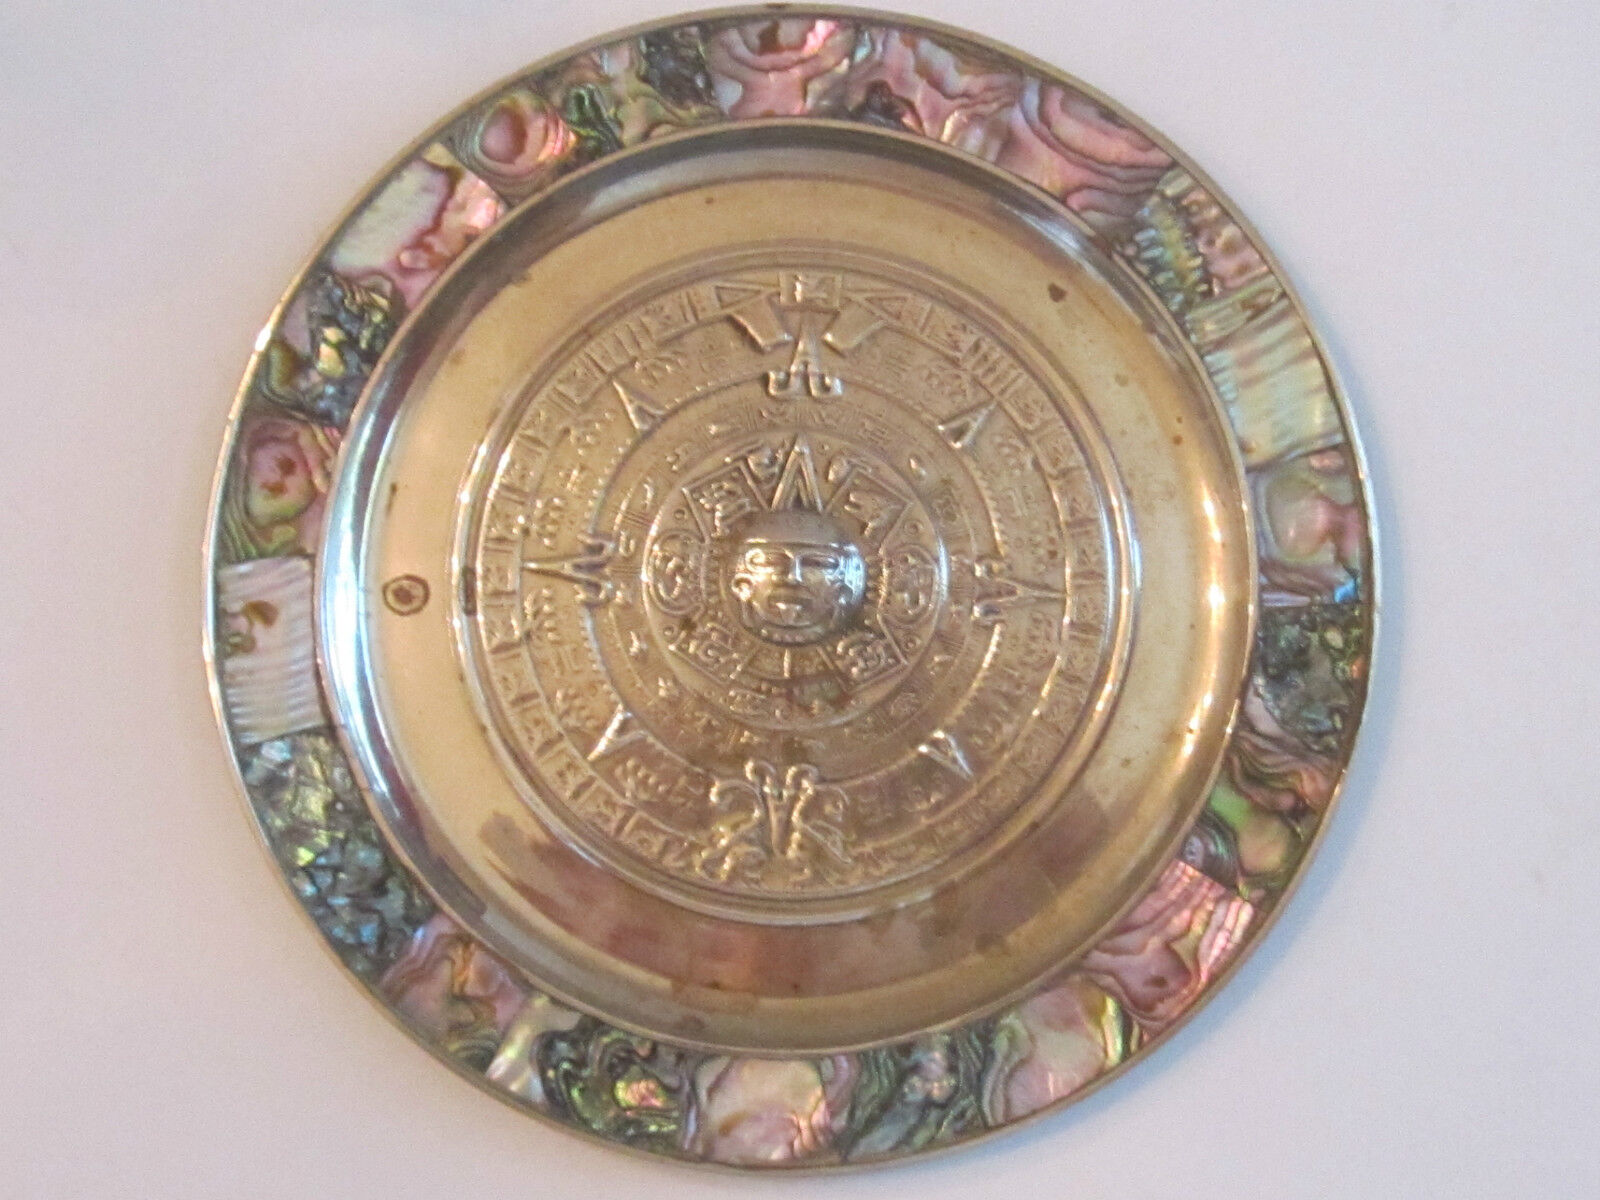 SUN DIAL SILVER PLATED PLATE WITH MOTHER OF PEARL - 8